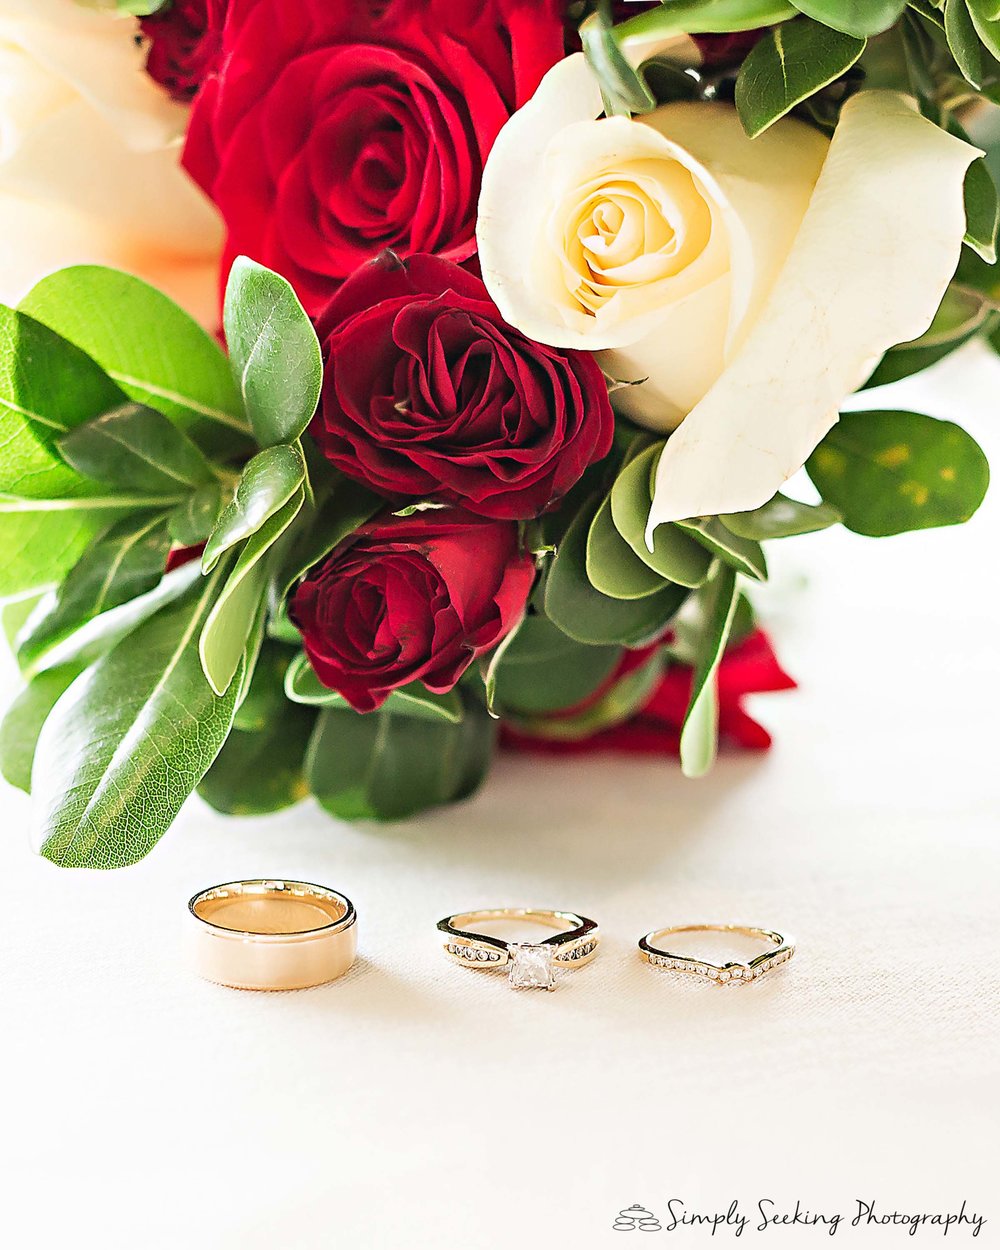 SSP spring wedding|details| florals| rings|red and charcoal wedding